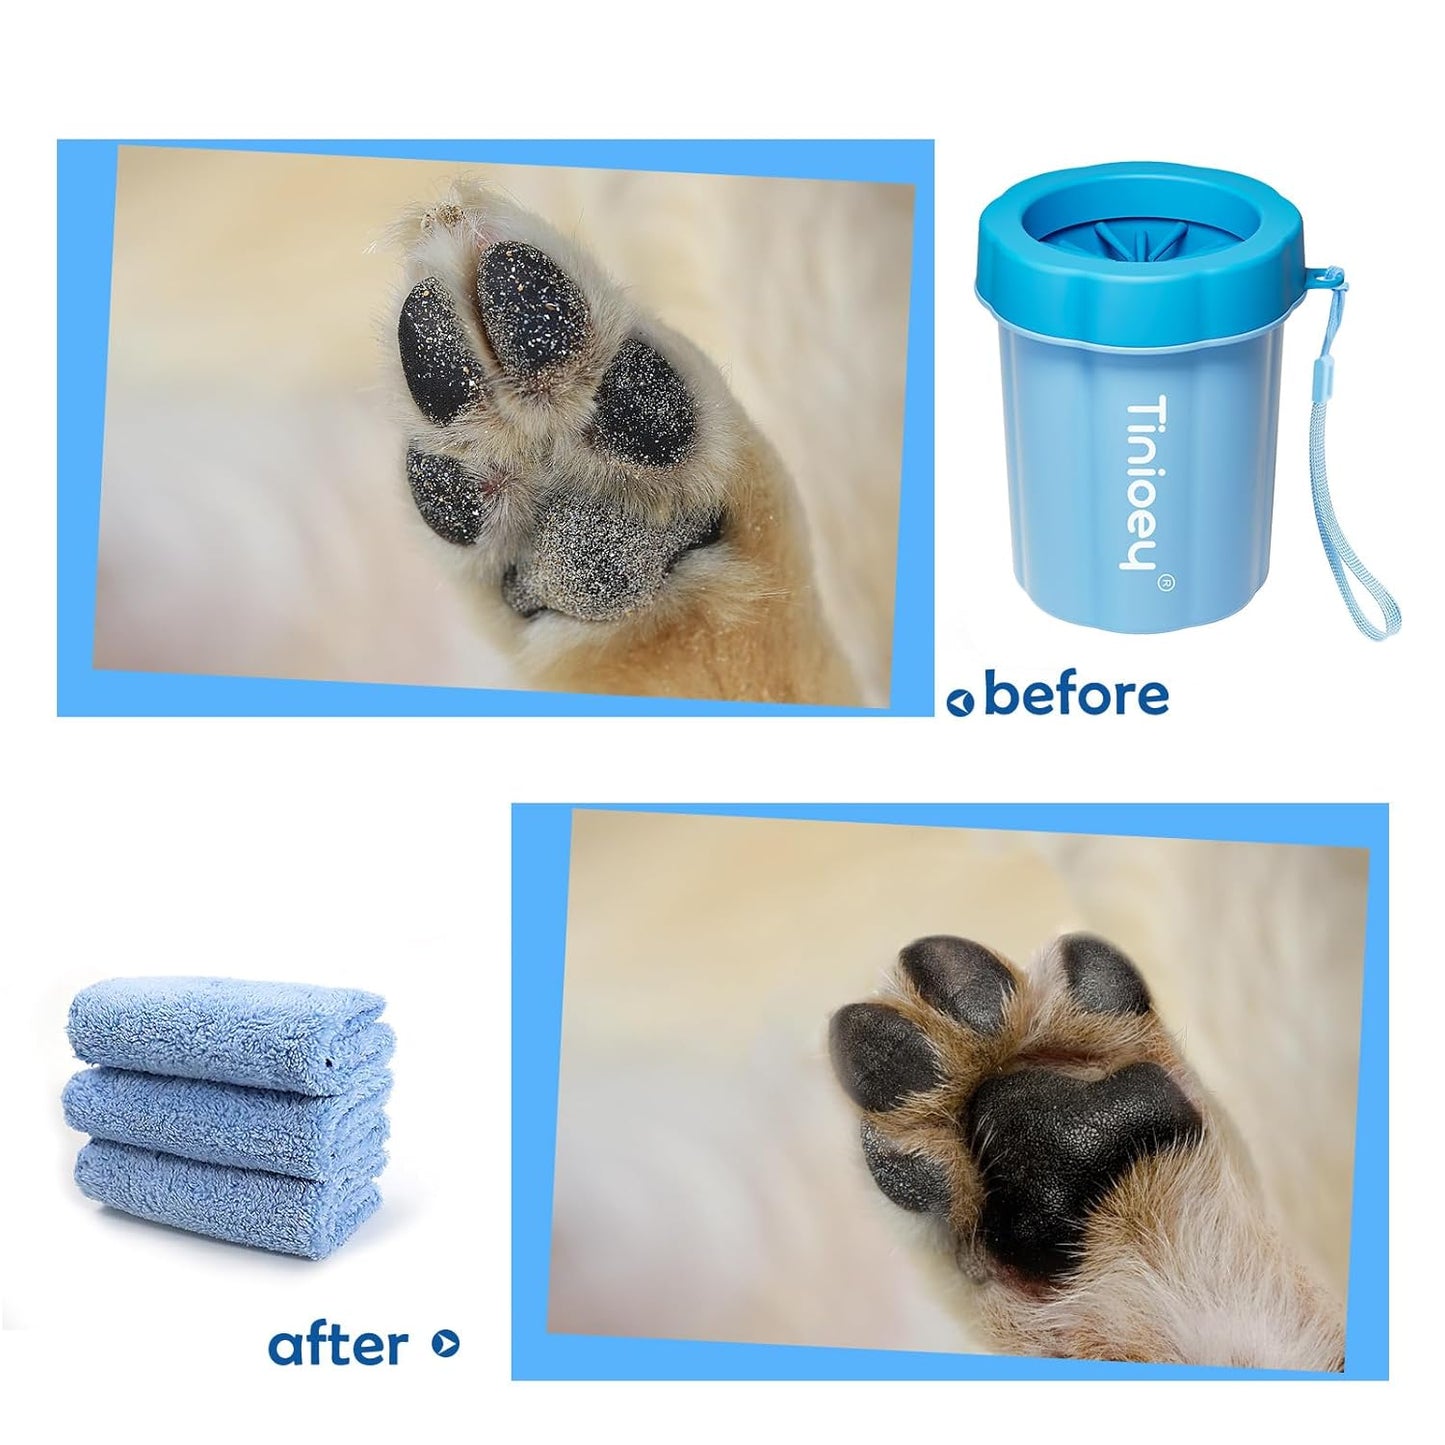 Dog Paw Cleaner for Medium Dogs (With 3 Absorbent Towels), Dog Paw Washer, Paw Buddy Muddy Paw Cleaner, Pet Foot Cleaner